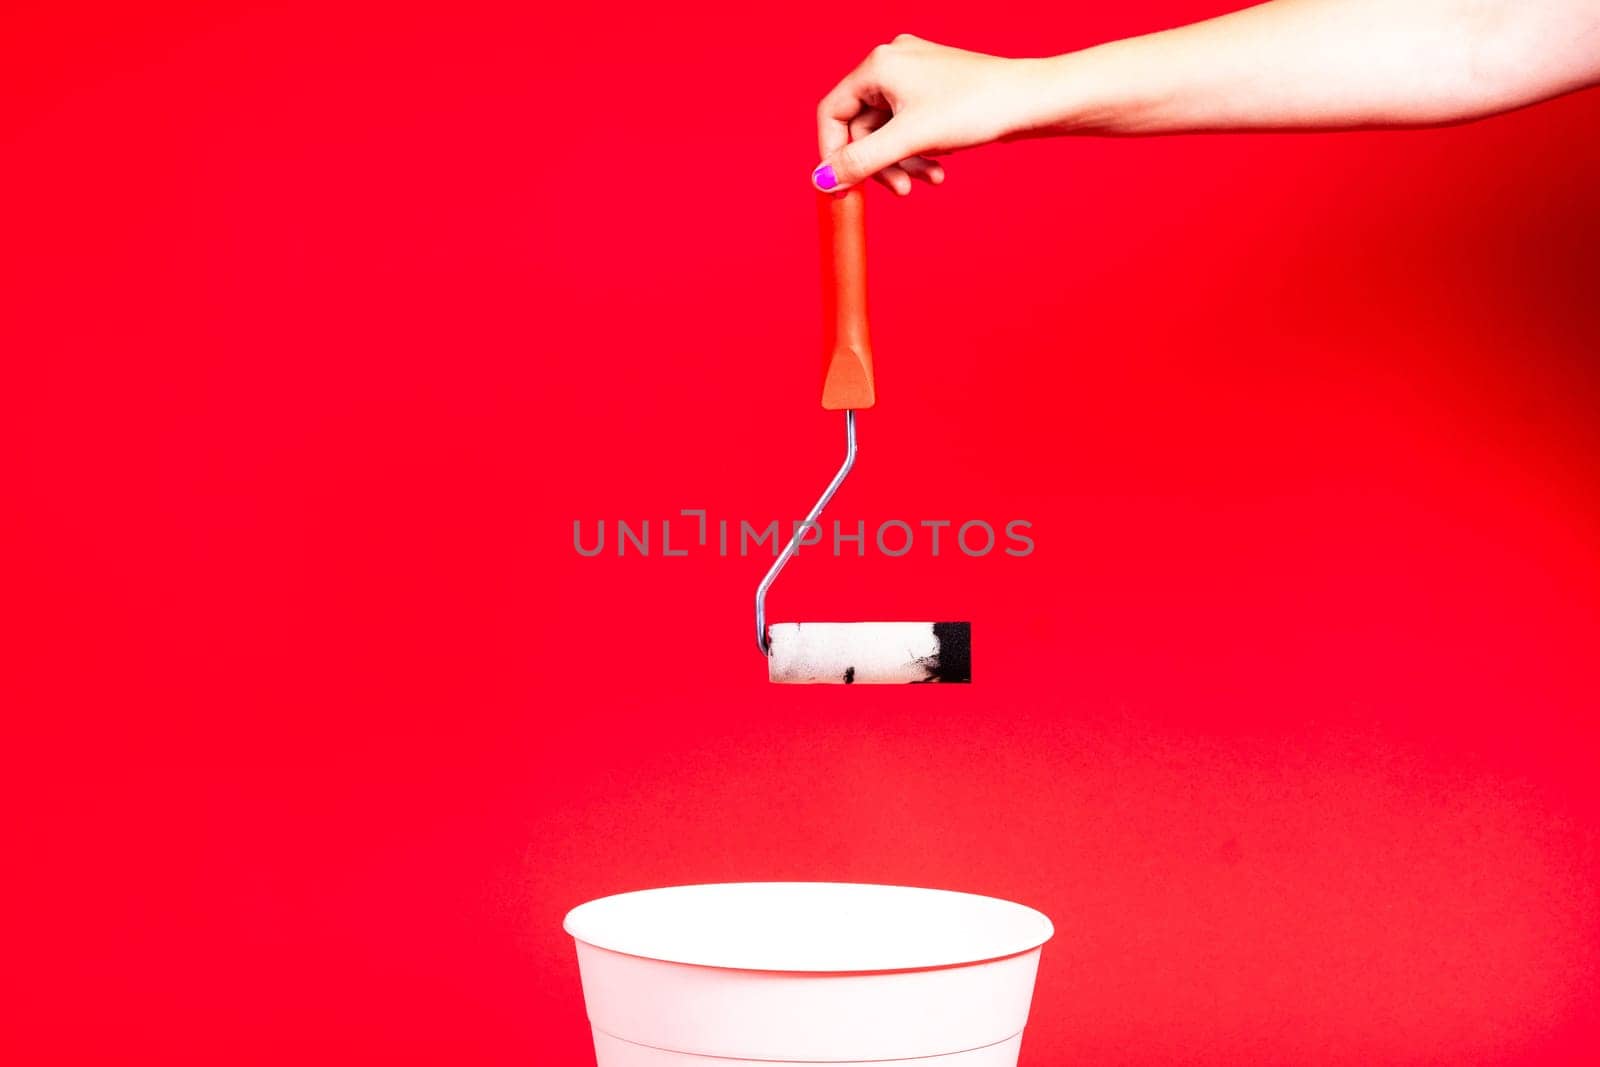 Construction roller is thrown into the trash on a red background by Zelenin